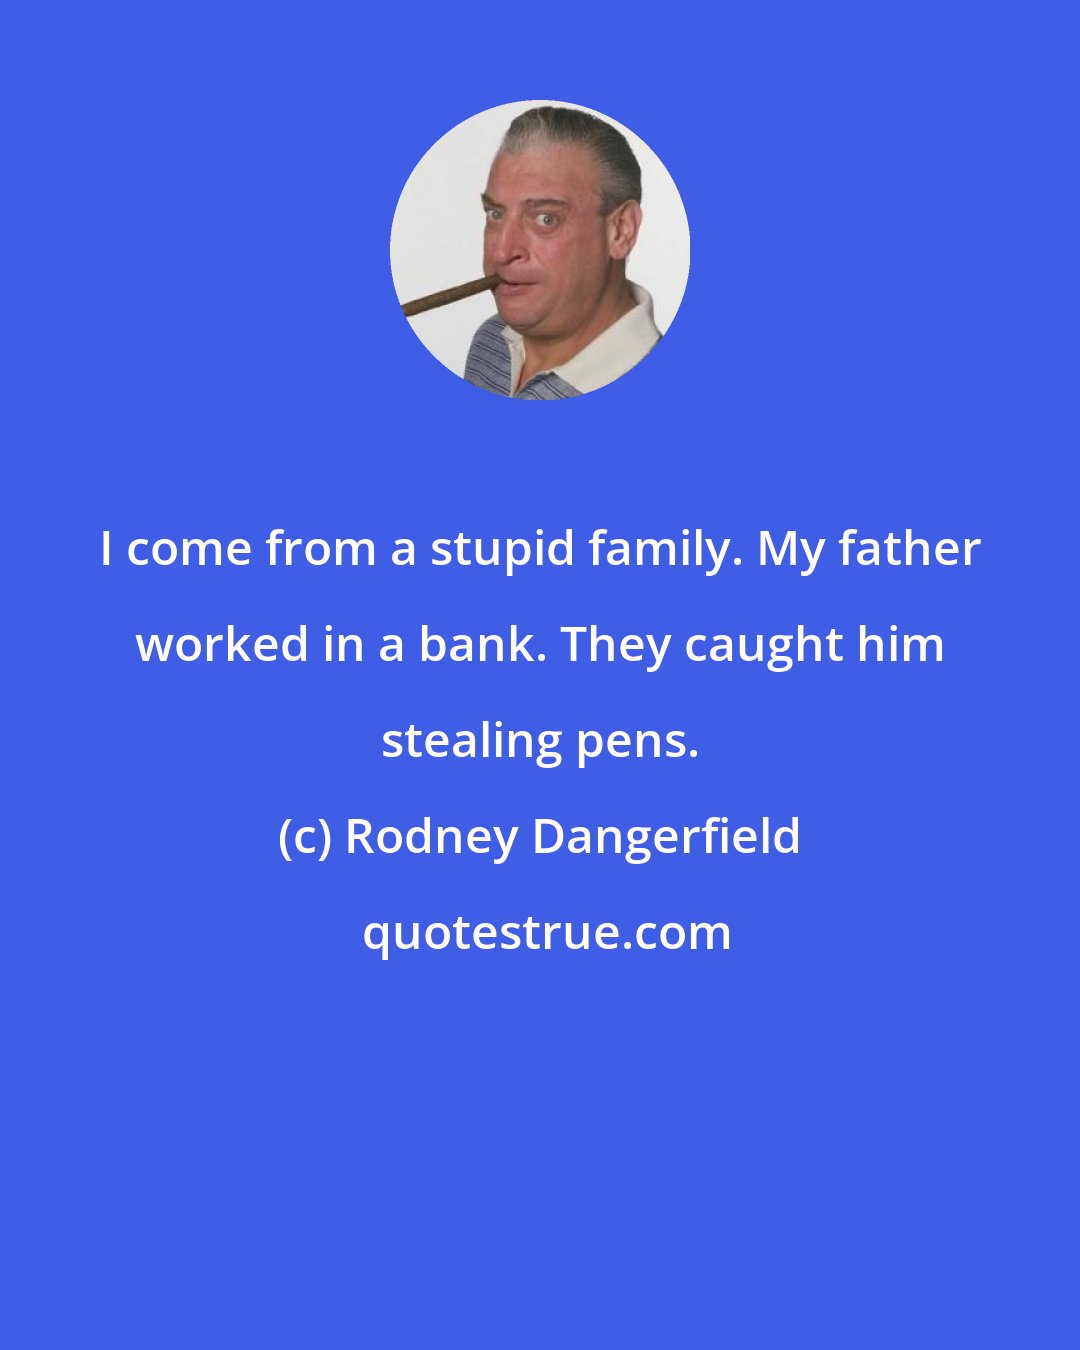 Rodney Dangerfield: I come from a stupid family. My father worked in a bank. They caught him stealing pens.